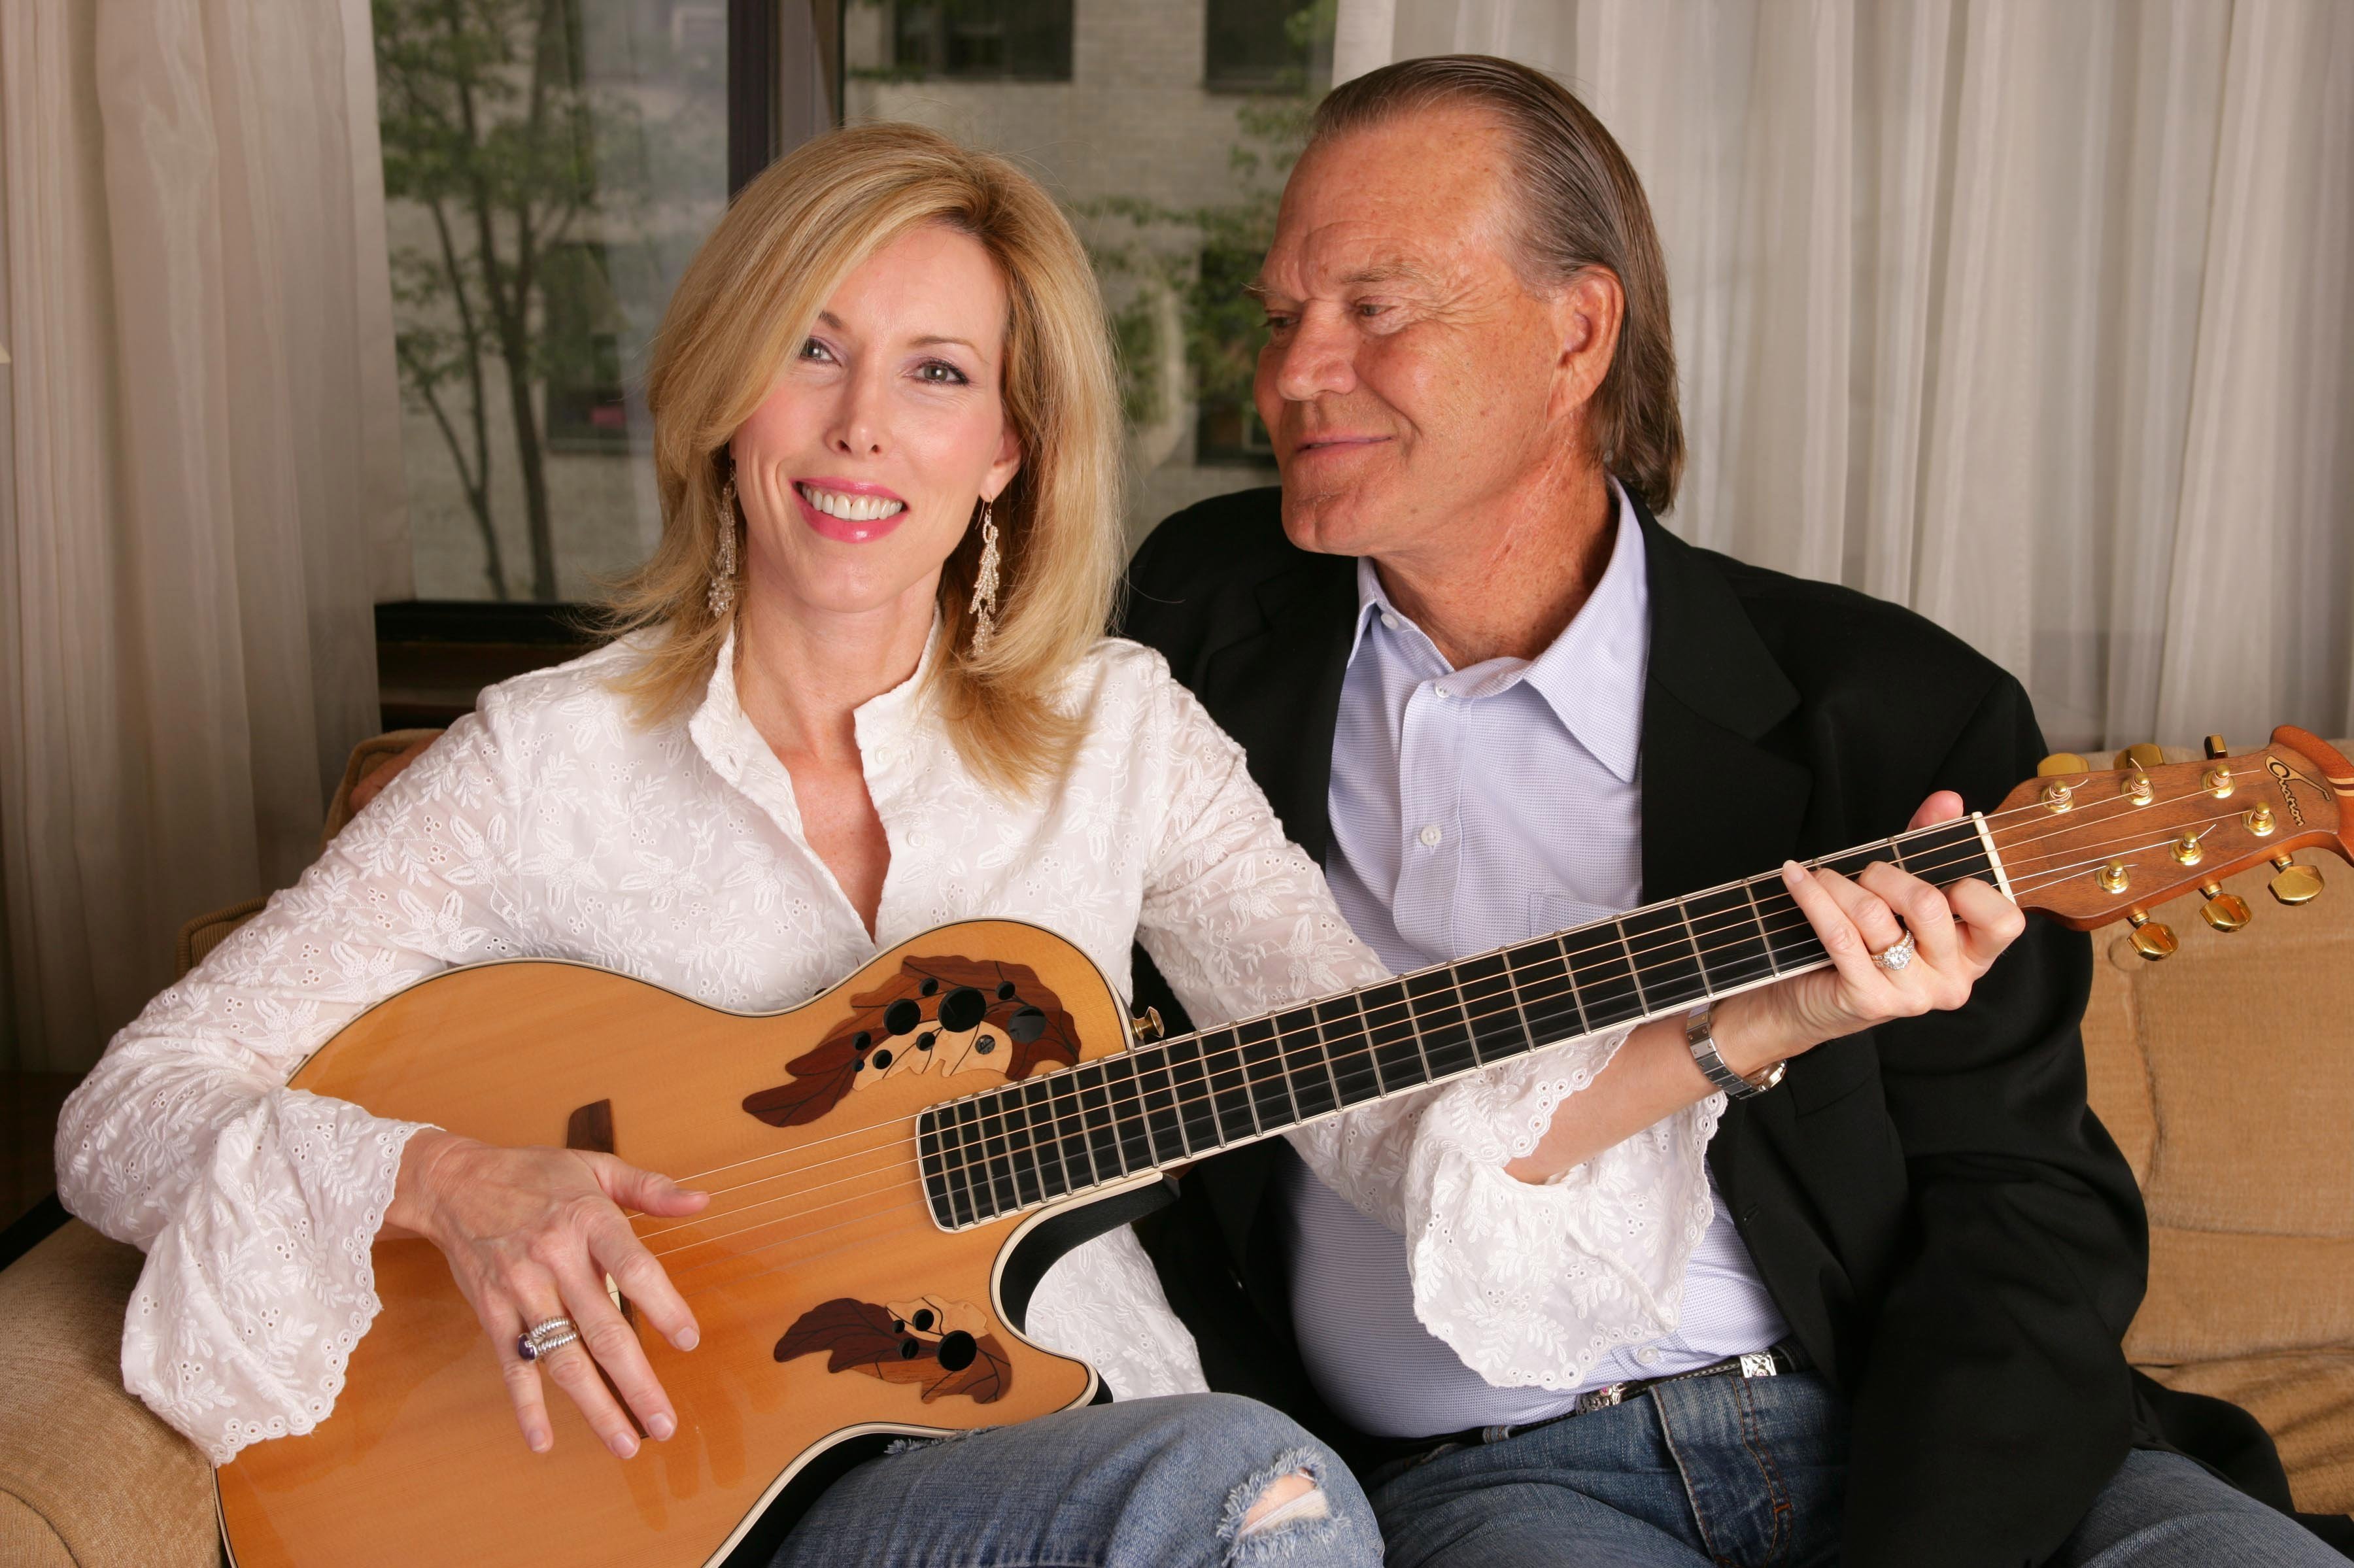 Kim Campbell with husband Glen Campbell during Glen Campbell portrait session at The Regency Hotel in New York, New York | Photo: Getty Images